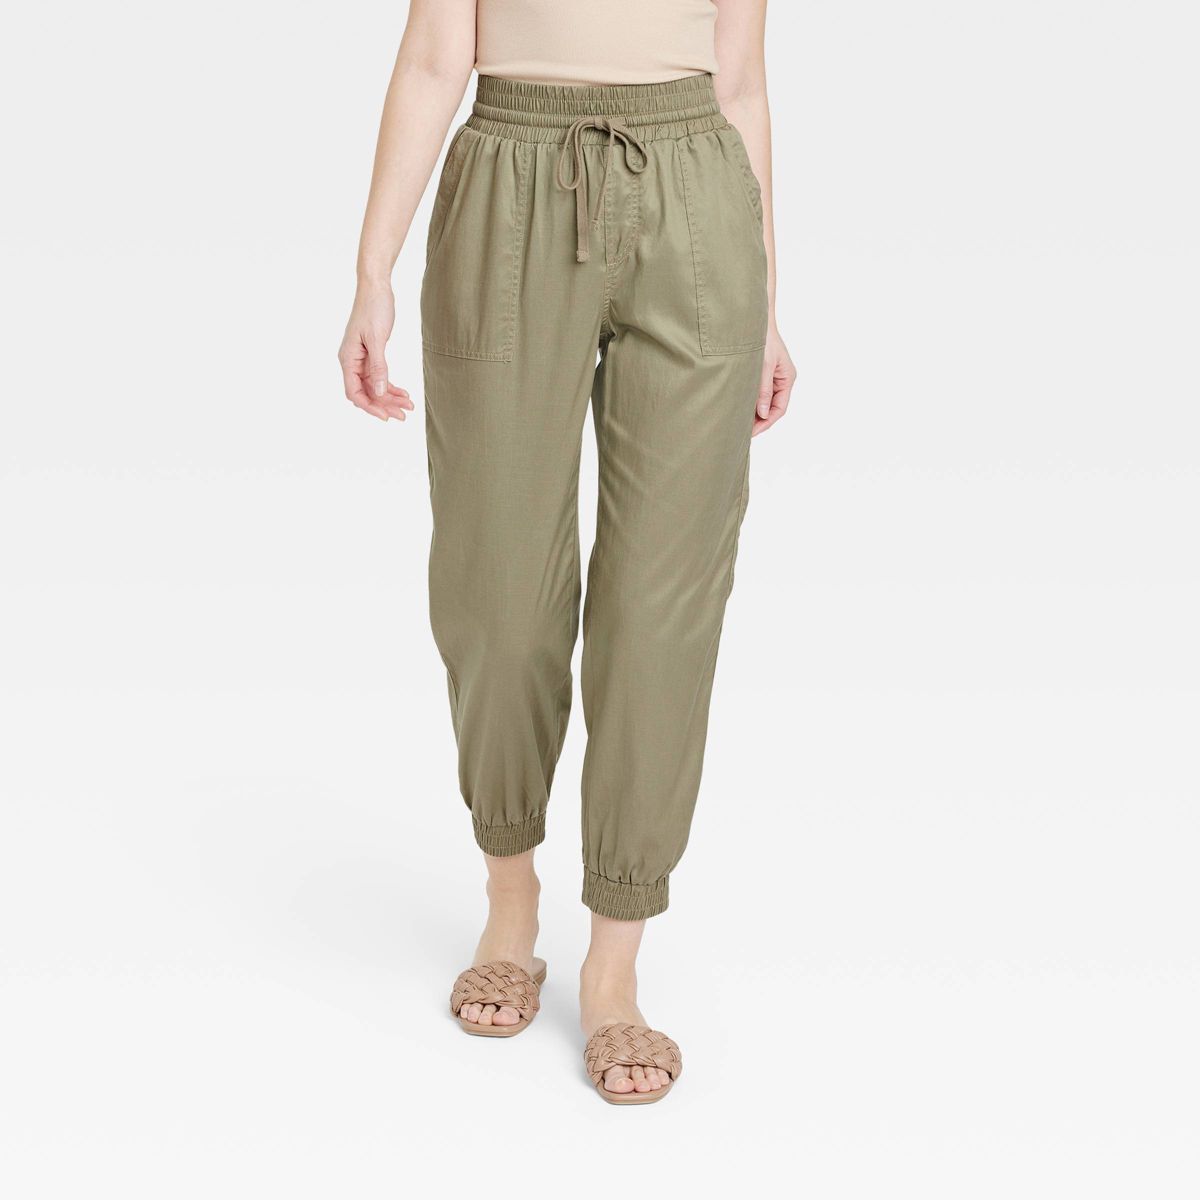 Women's High-Rise Ankle Jogger Pants - A New Day™ Olive L | Target